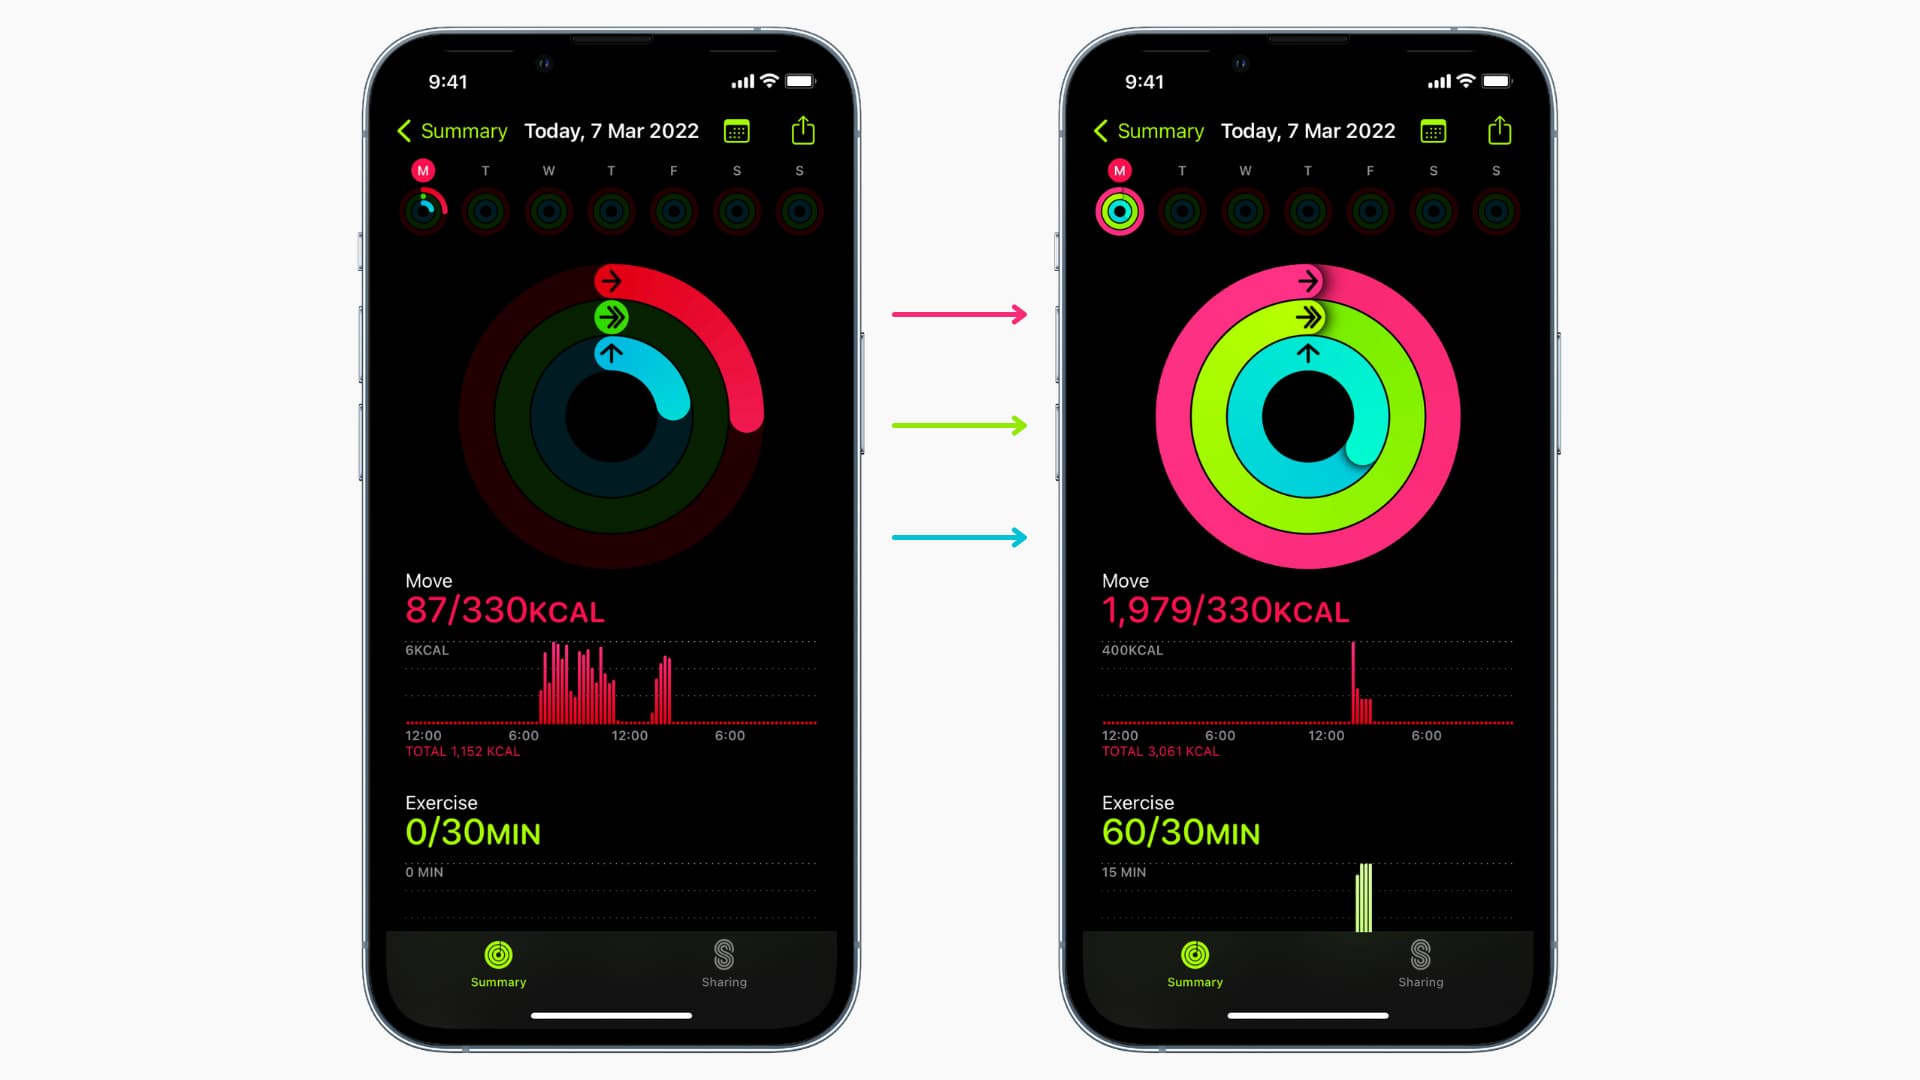 blad eeuw Rode datum How to close your Activity rings by adding data manually